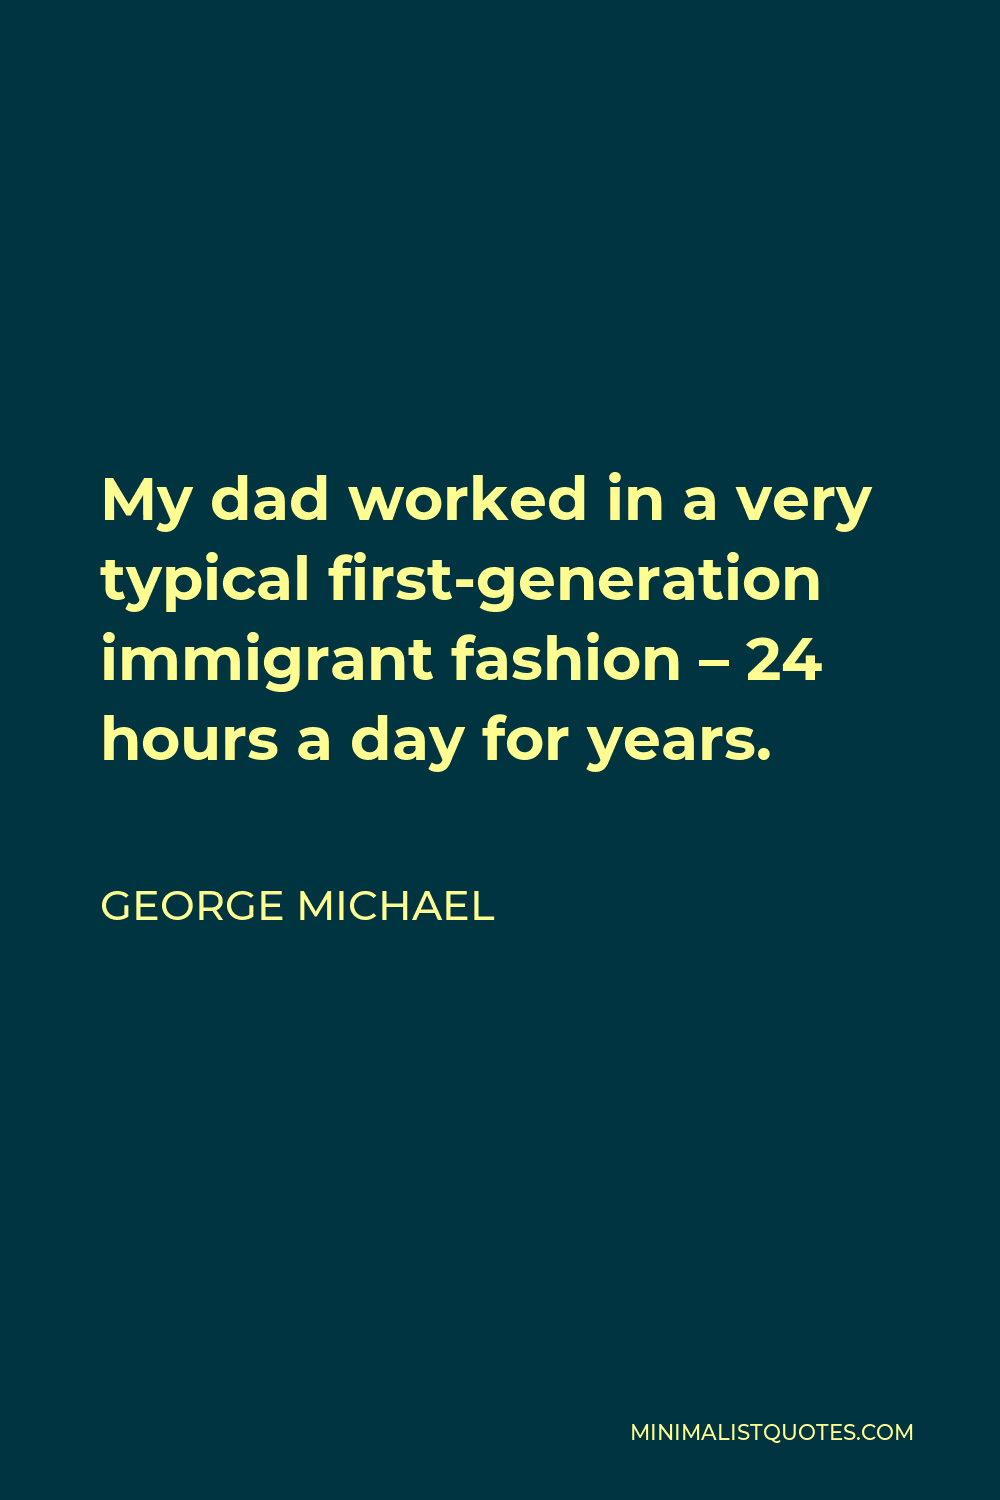 George Michael Quote - My dad worked in a very typical first-generation immigrant fashion – 24 hours a day for years.